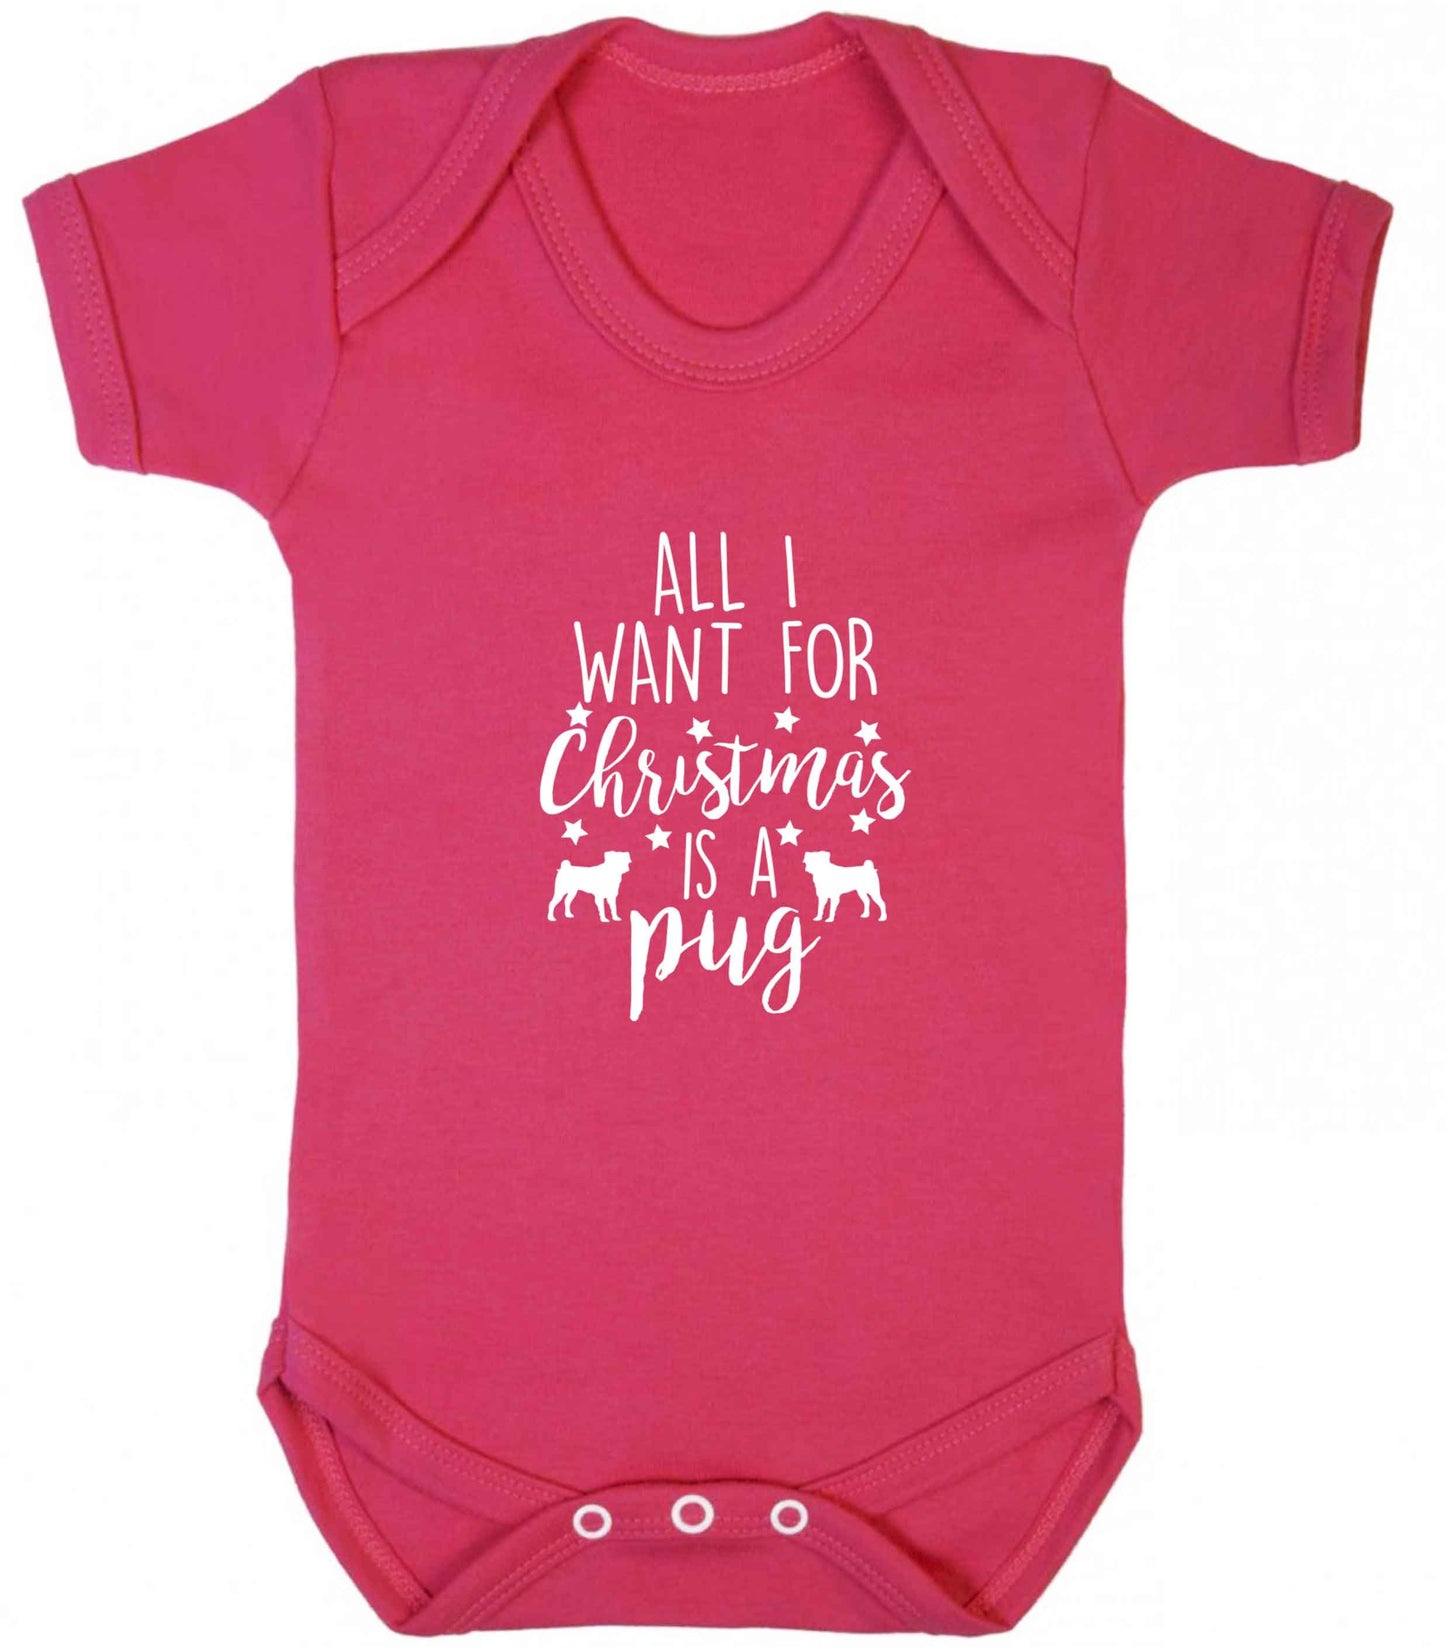 All I want for Christmas is a pug baby vest dark pink 18-24 months